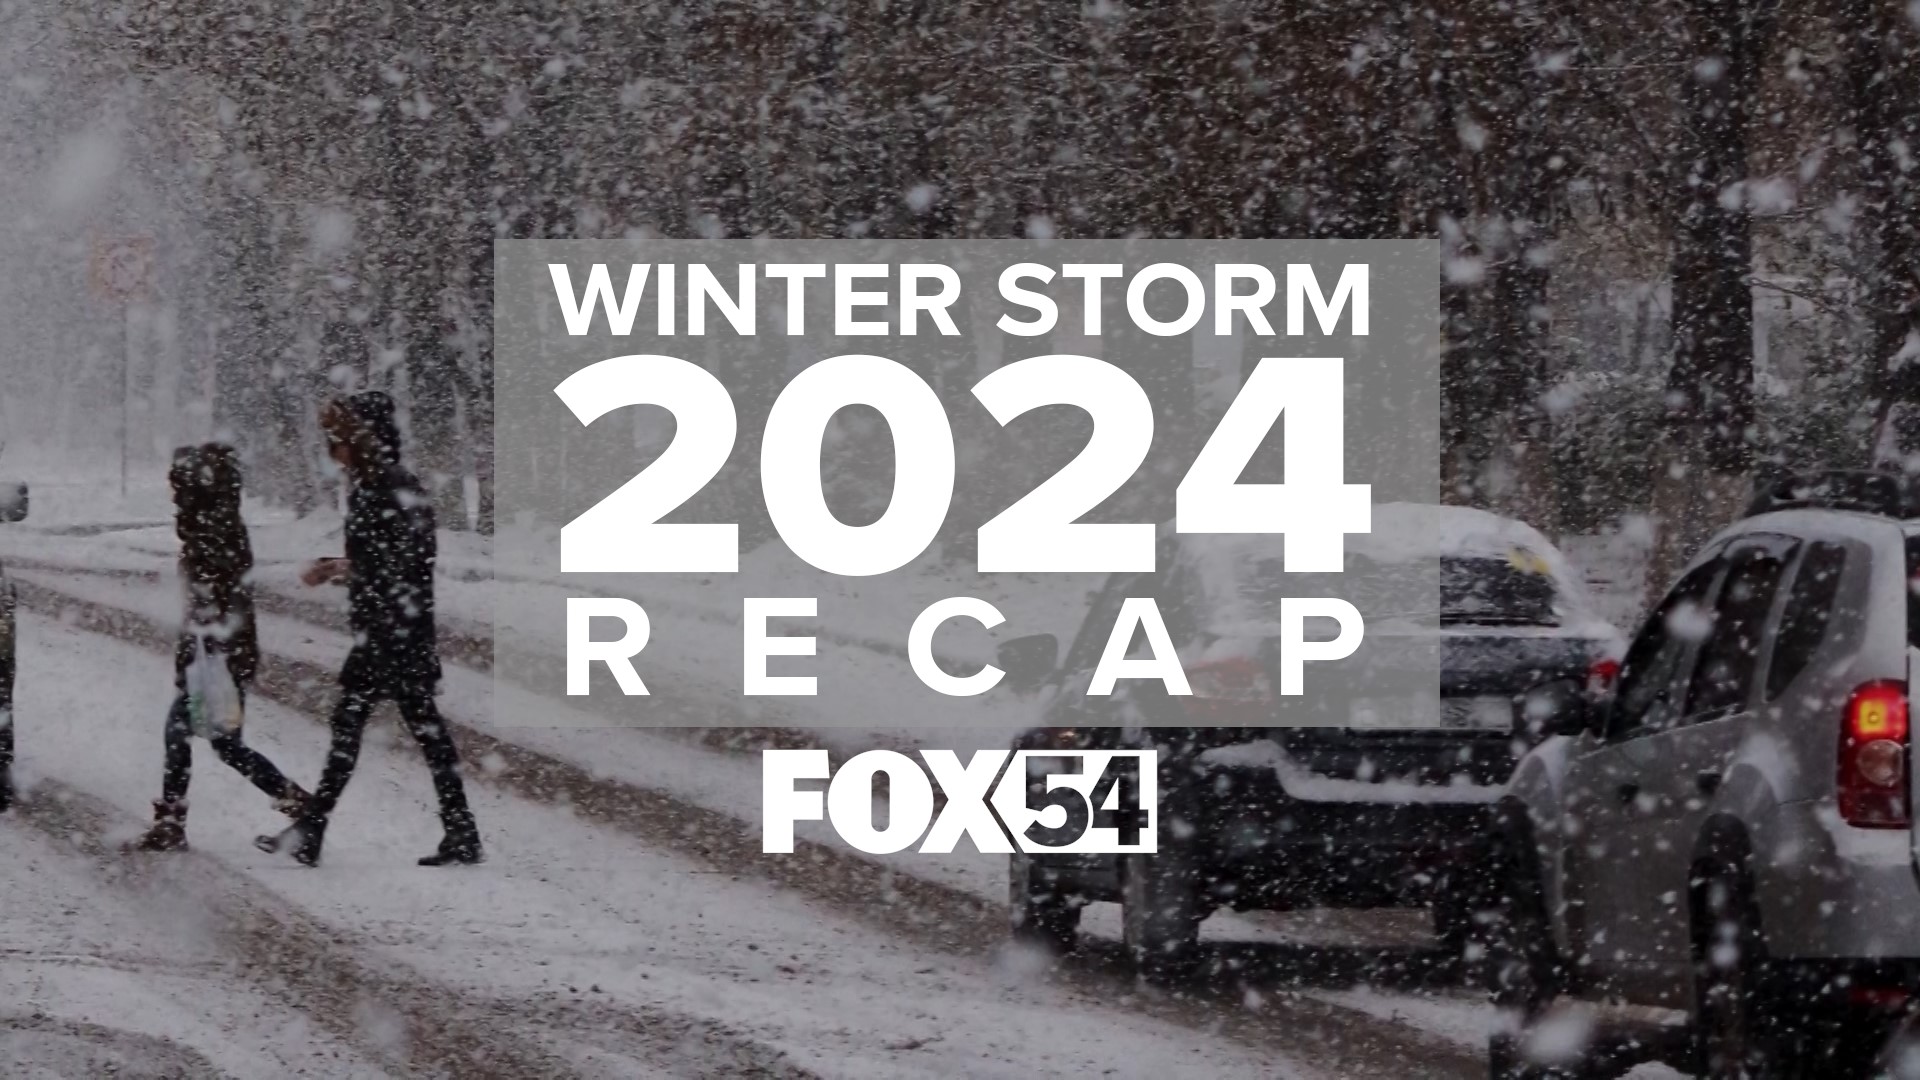 A compilation of FOX54's coverage of the winter weather system that blanketed North Alabama the week of Jan. 15-19, 2024.